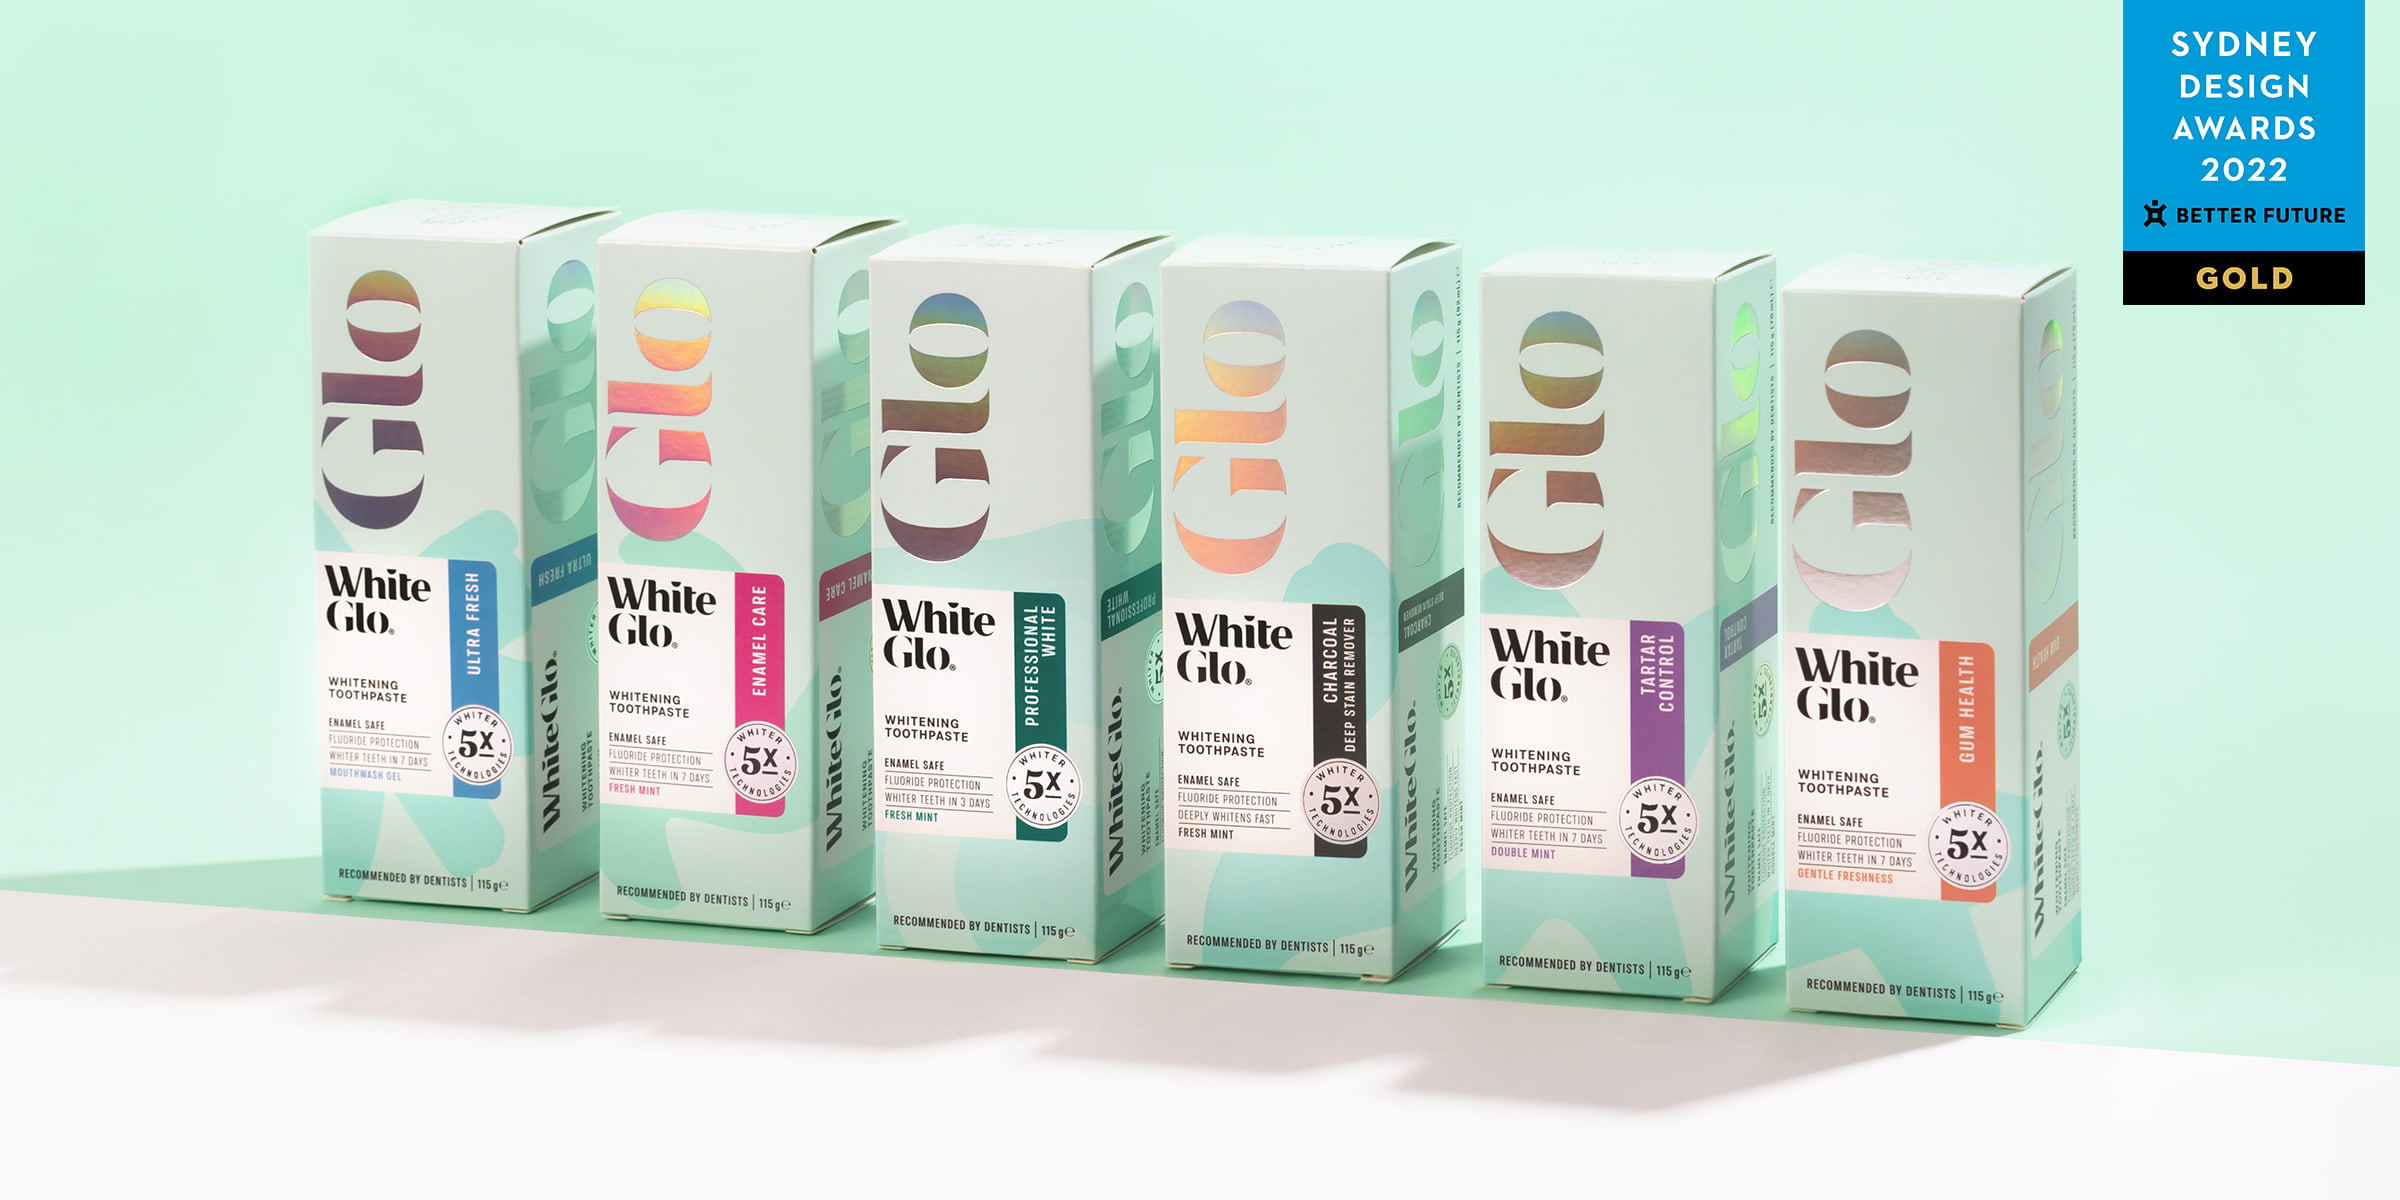 white-glow-barros-boxer-and-co-brand-packaging-design-redesign-toothpaste-award-winner-gold-sydney-green-holographic-premium